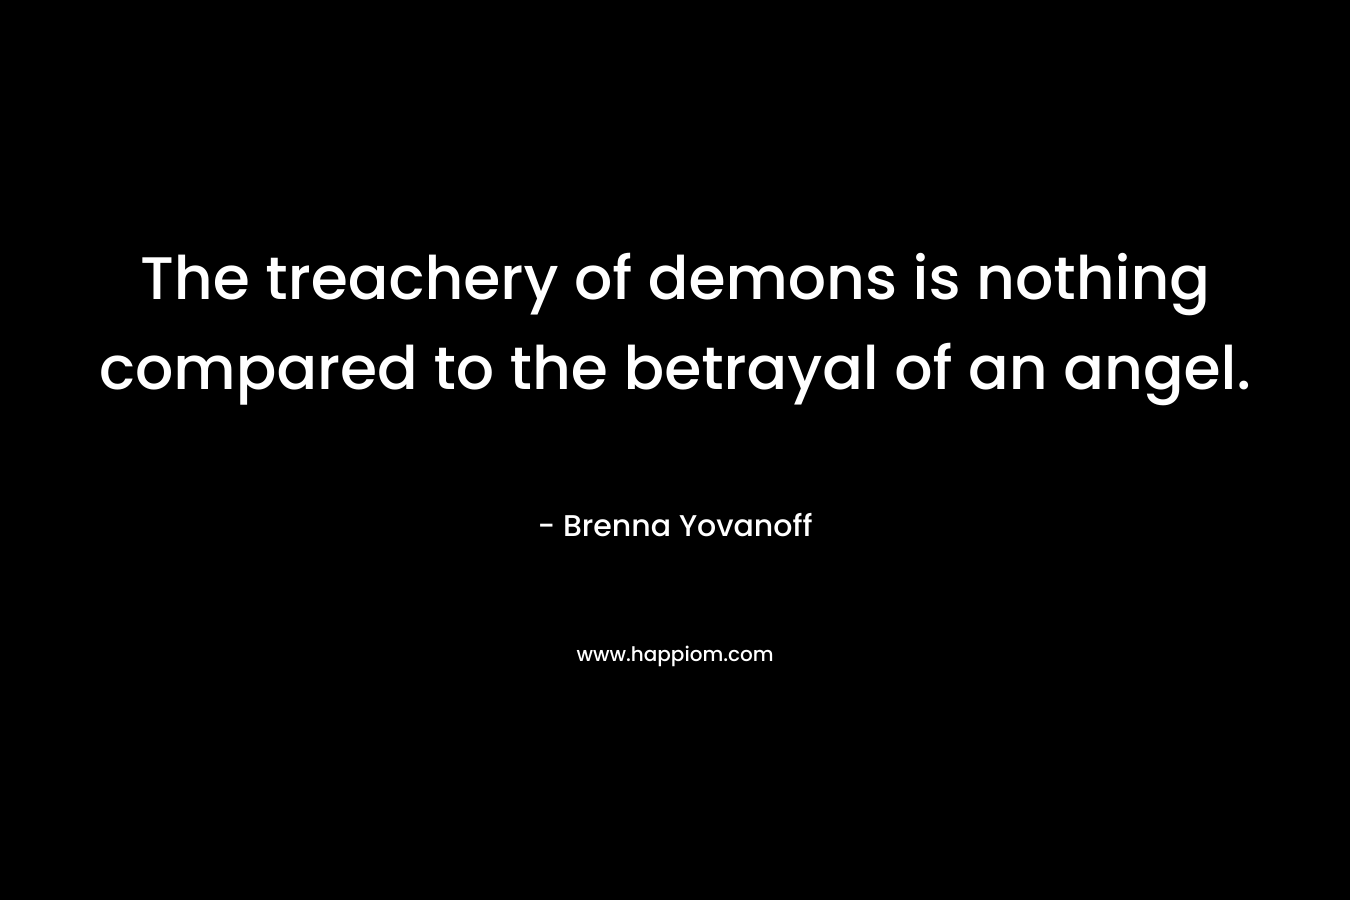 The treachery of demons is nothing compared to the betrayal of an angel. – Brenna Yovanoff